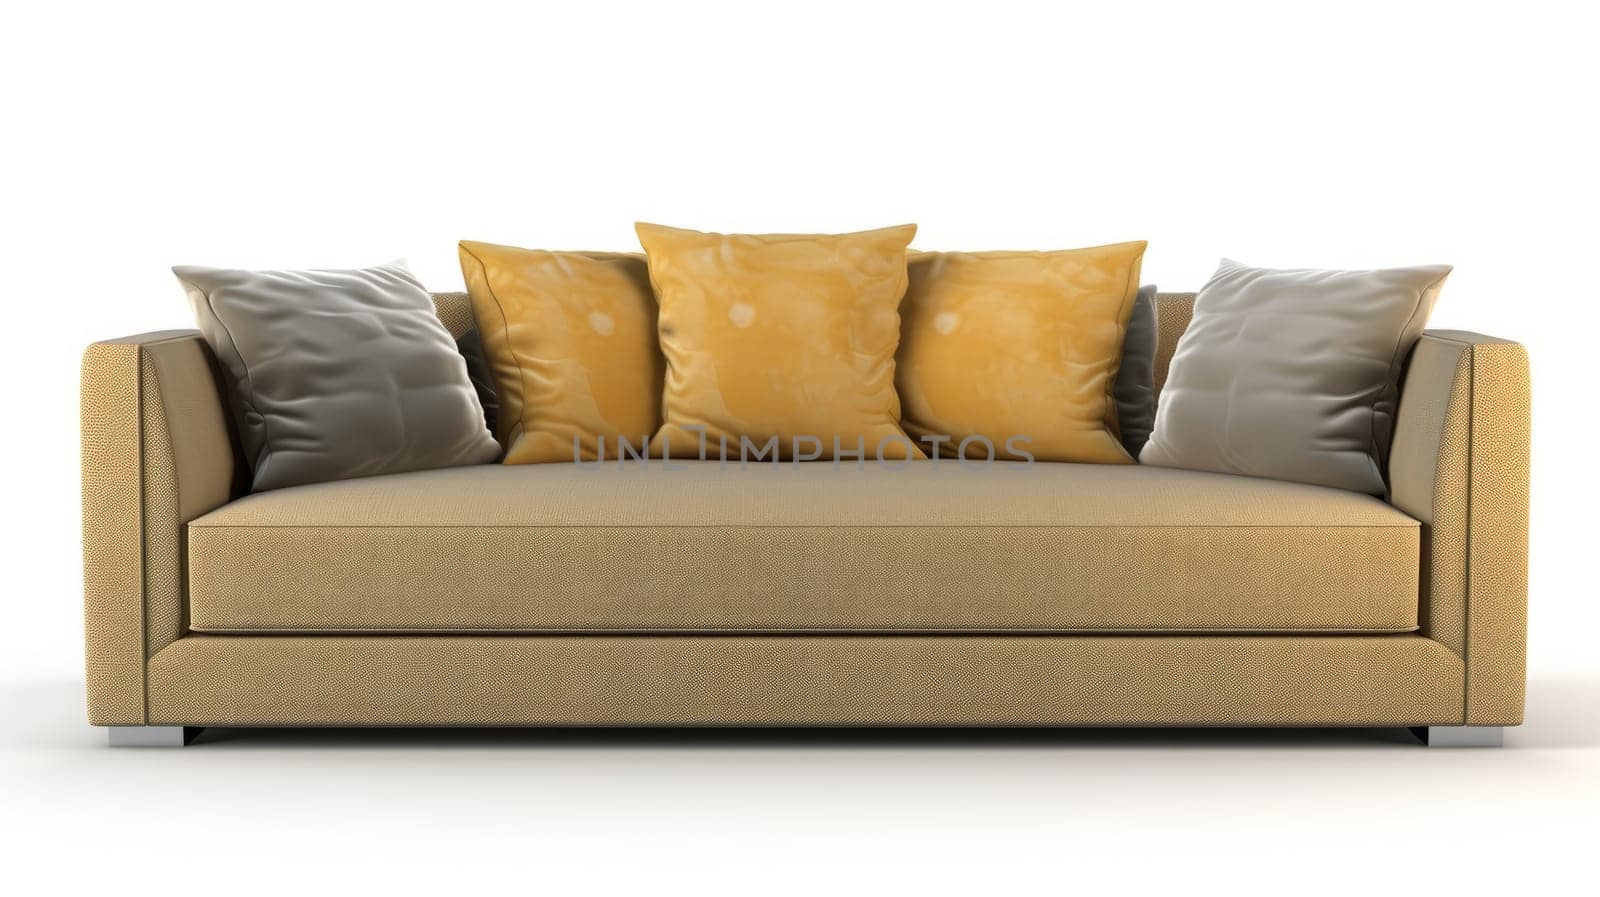 Mustard colored fabric modern sofa with two grey pillows, isolated on a white background, front view.